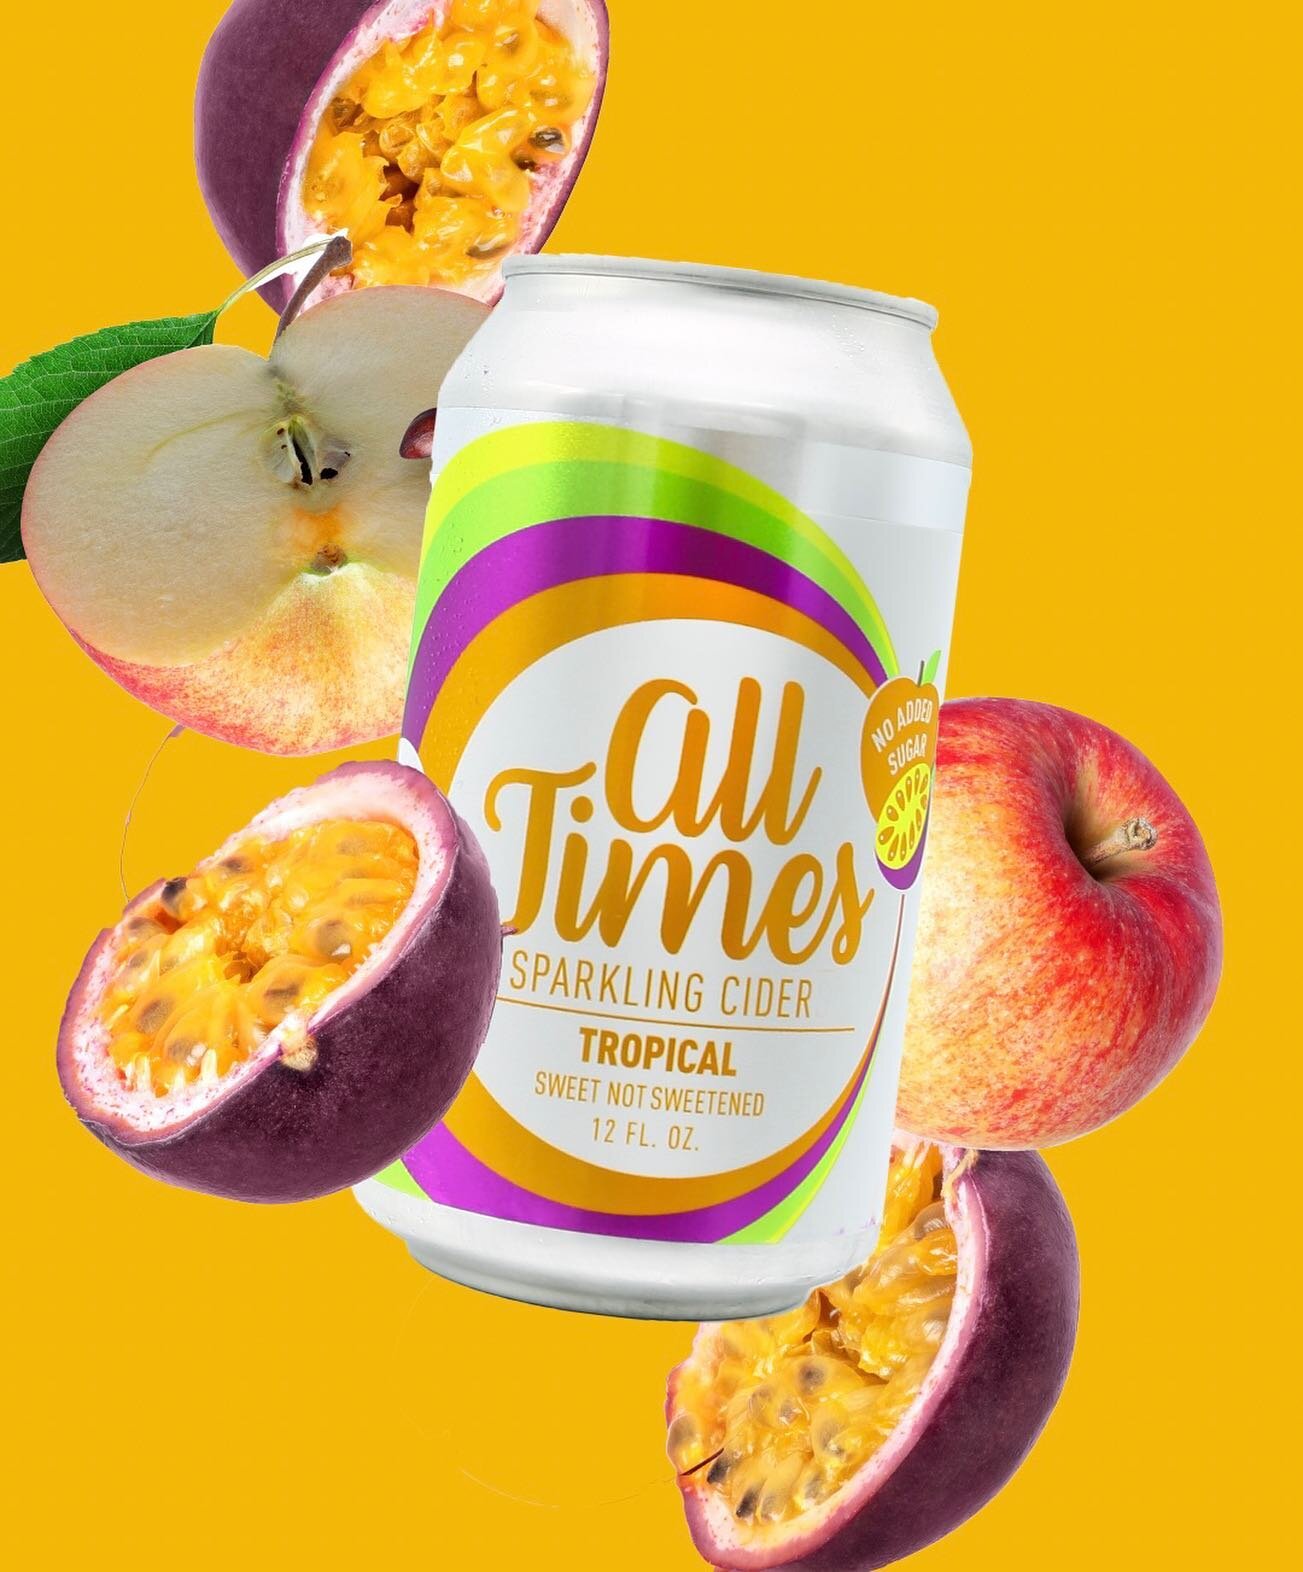 Bright and flavorful, we make All Times Tropical with apples and passionfruit! Who says delicious has to be complicated? Sweet not sweetened, made with 100% locally sourced apples. 

 #locallysourced #sparklingcider #alltimes #enjoyalltimes #realfrui